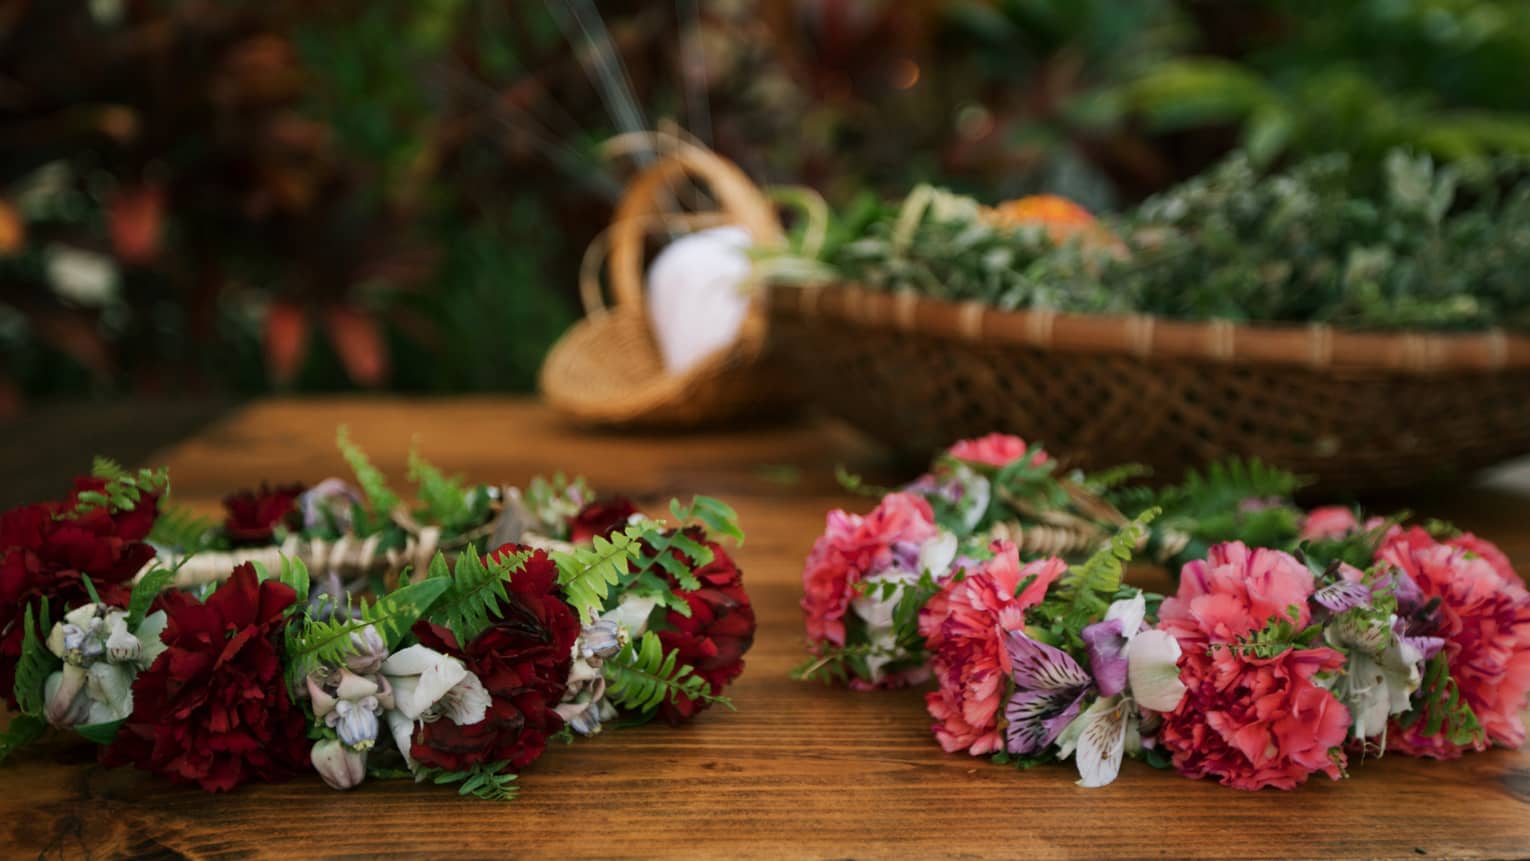 Floral wedding crowns on table near basket